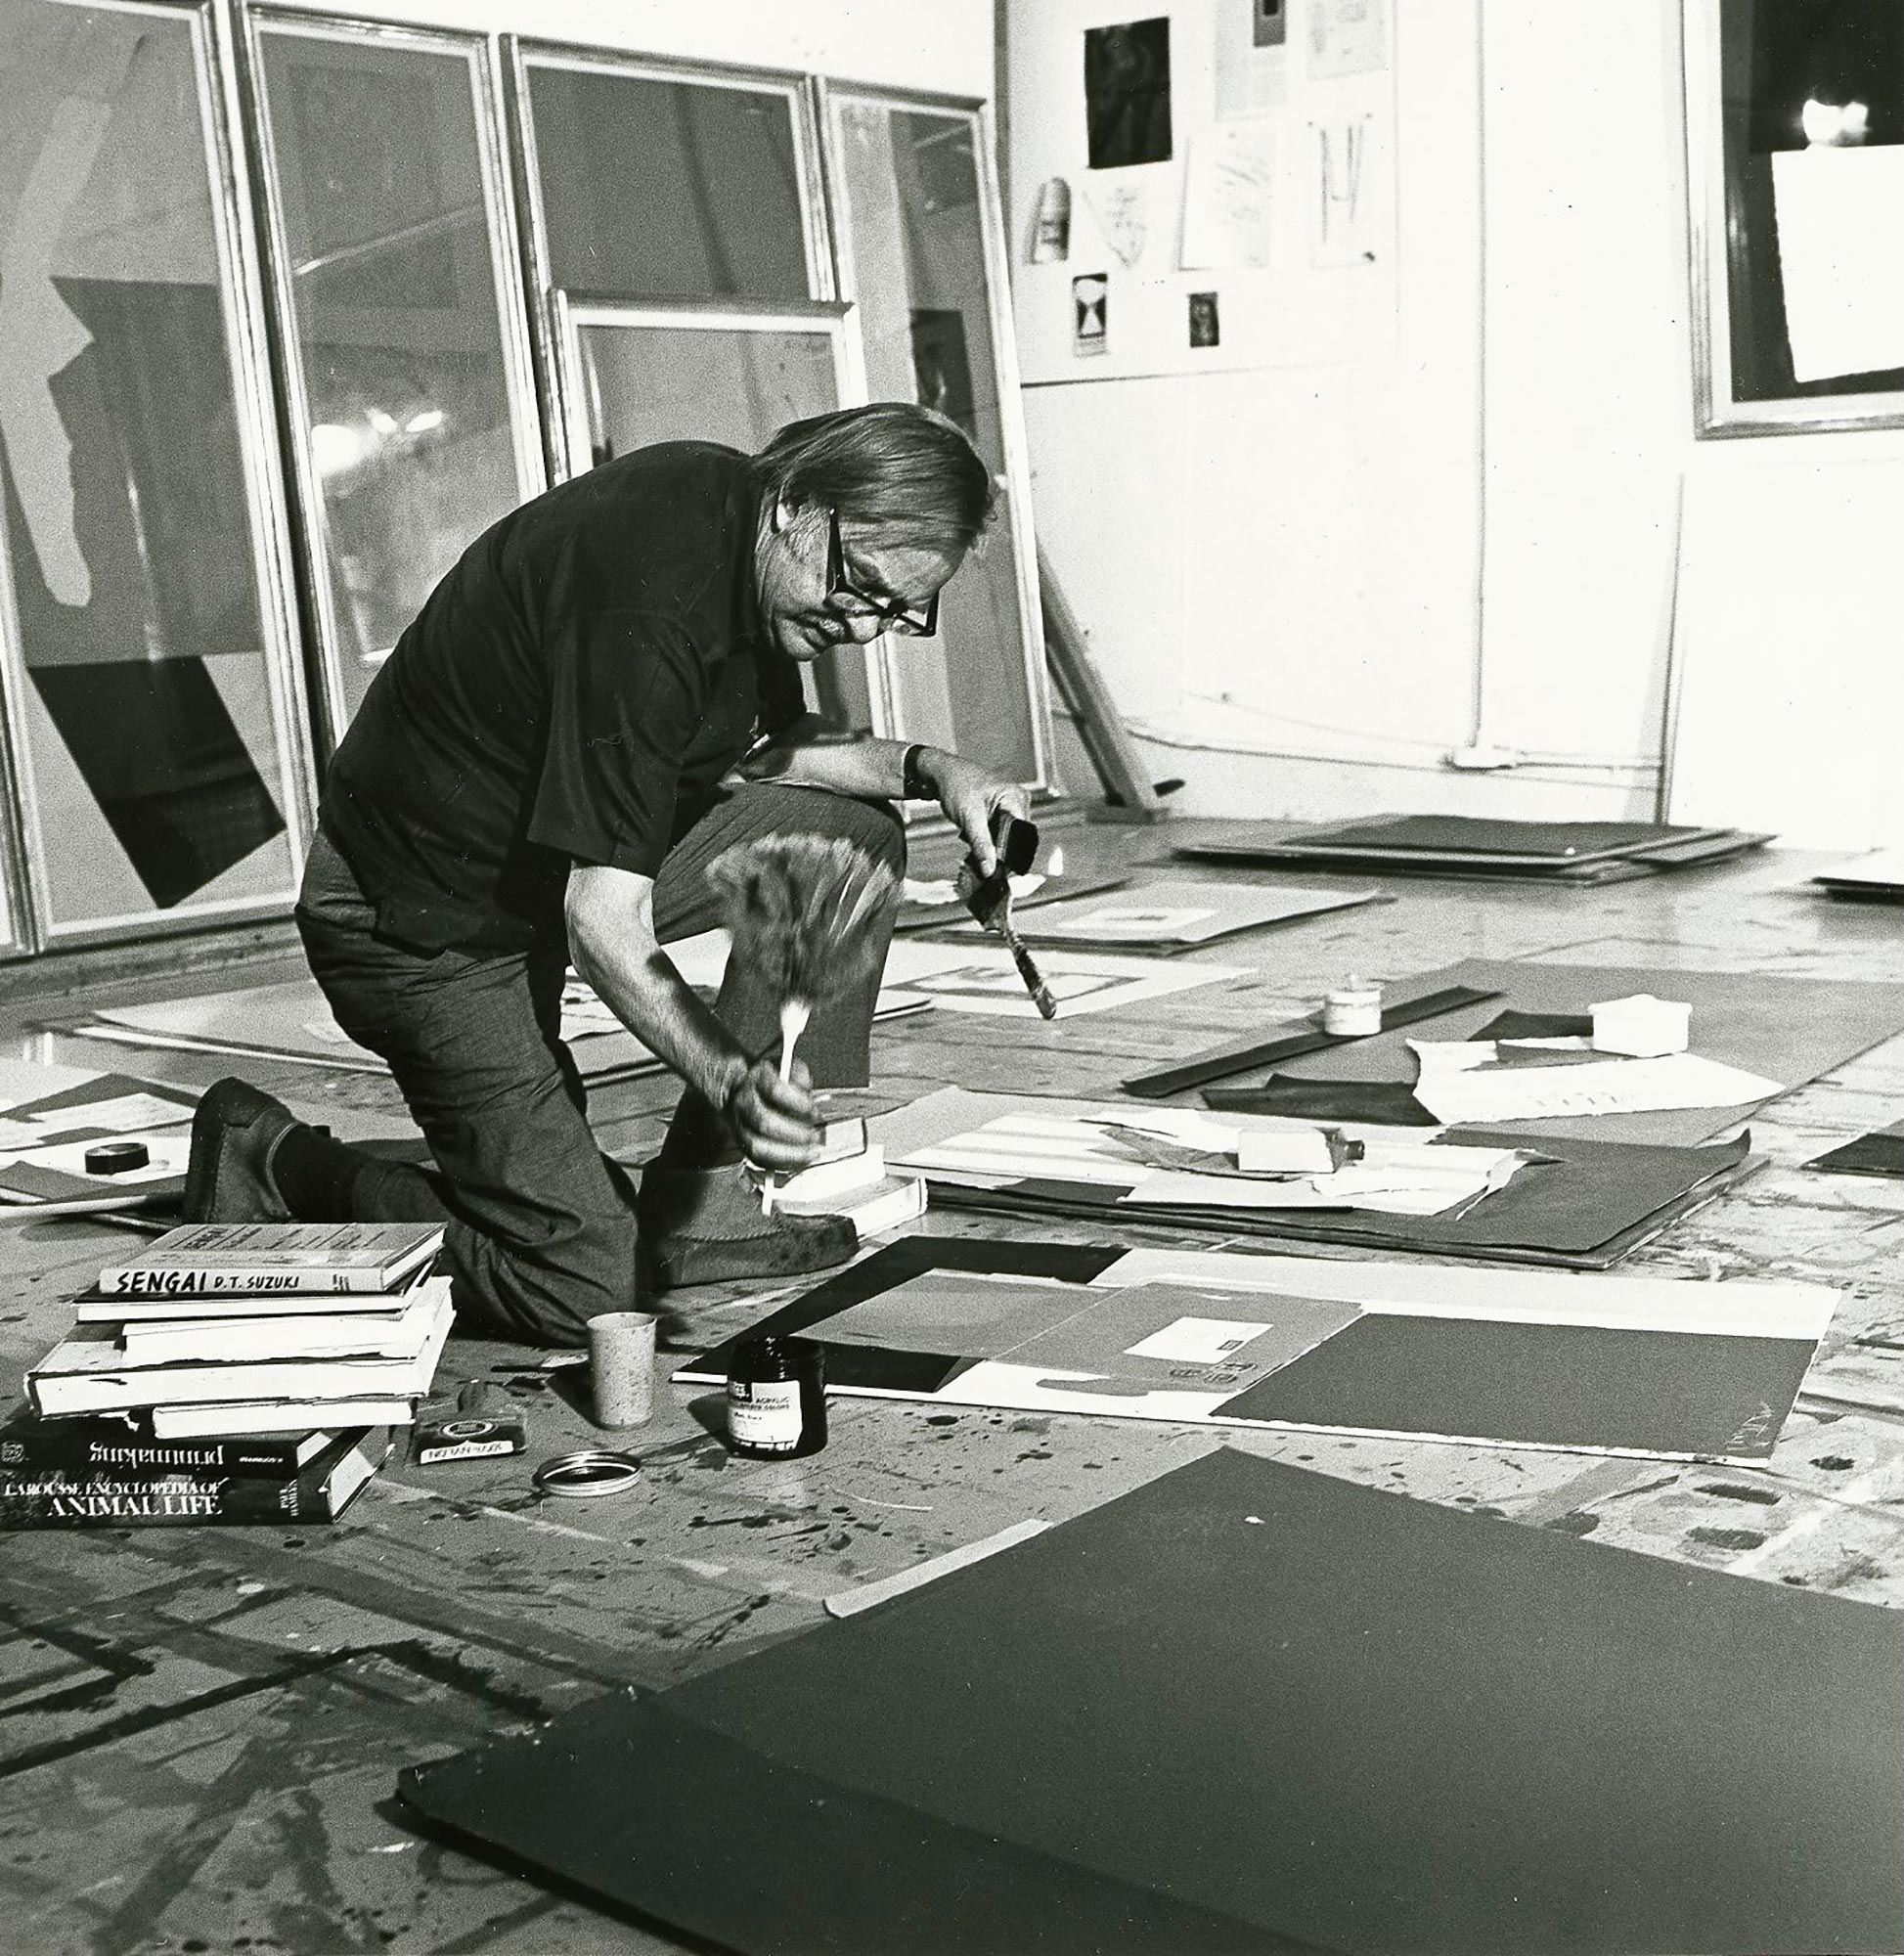 Robert Motherwell painting on the ground in his studio